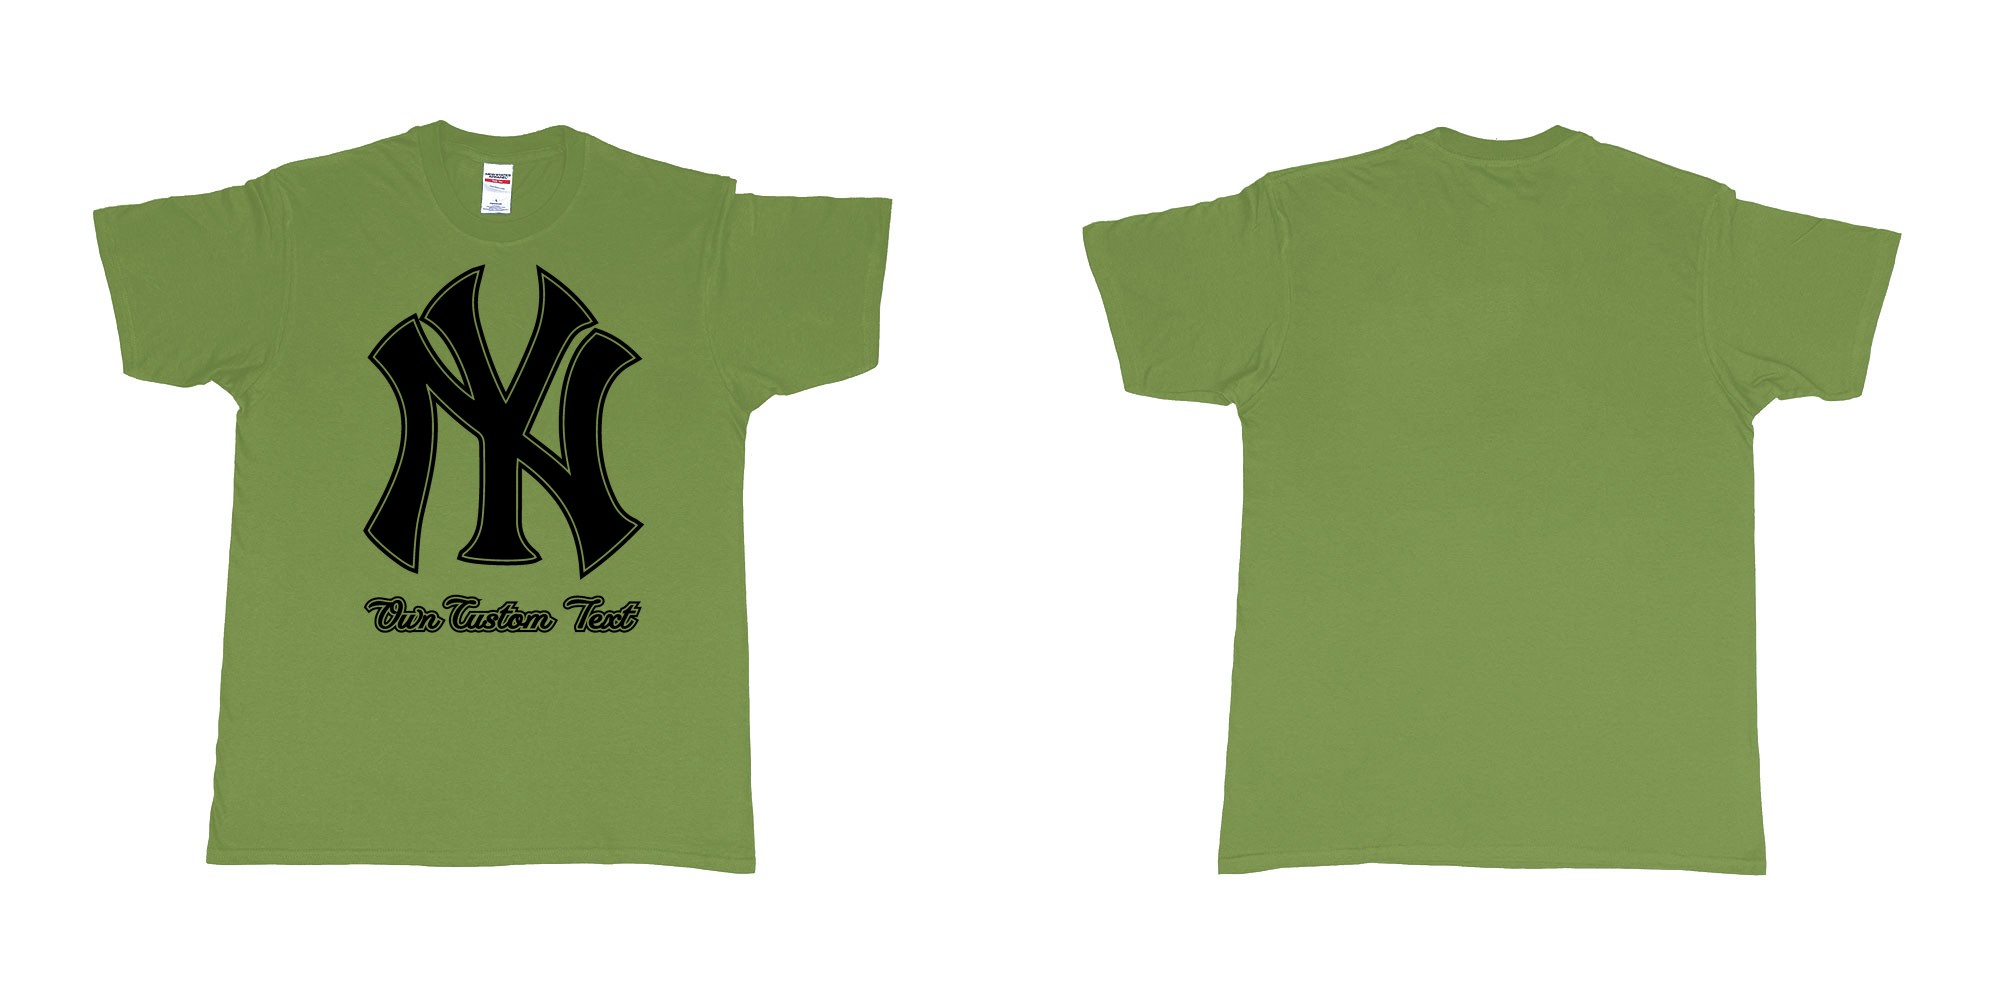 Custom tshirt design new york yankees baseball team custom design in fabric color military-green choice your own text made in Bali by The Pirate Way